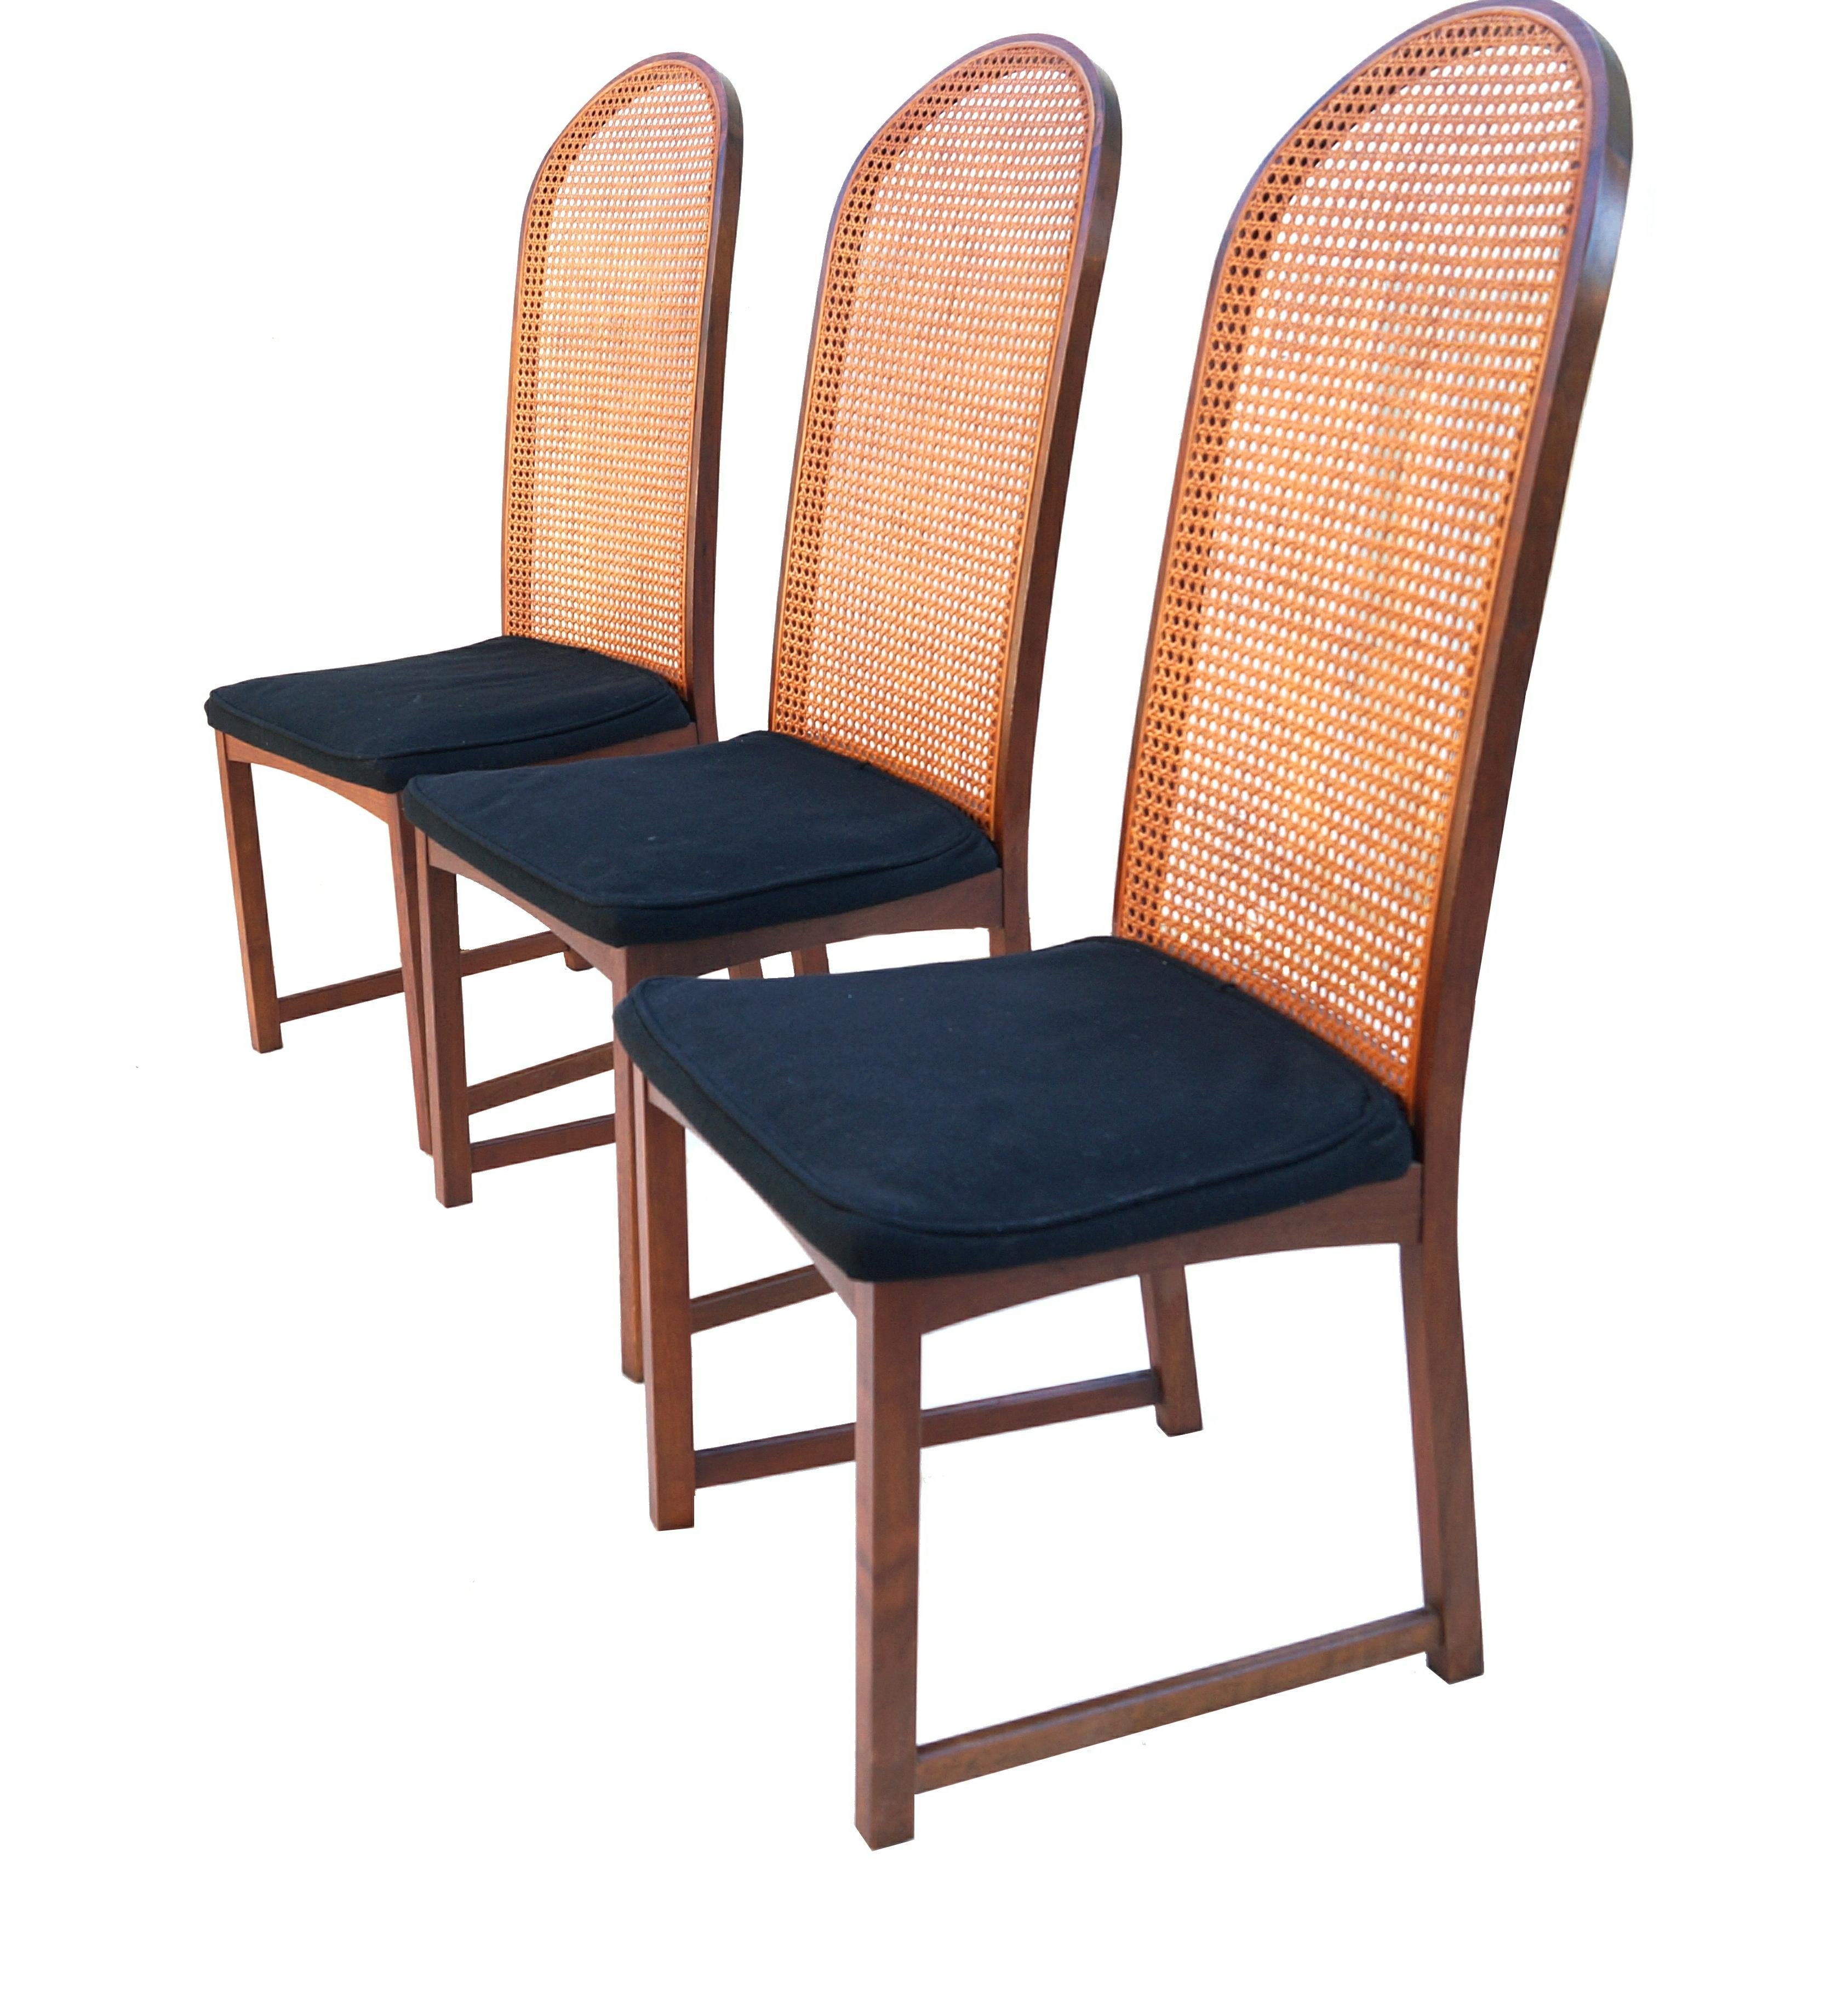 Late 20th Century Set of 5 Milo Baughman Curved Cane Back Dining Chairs